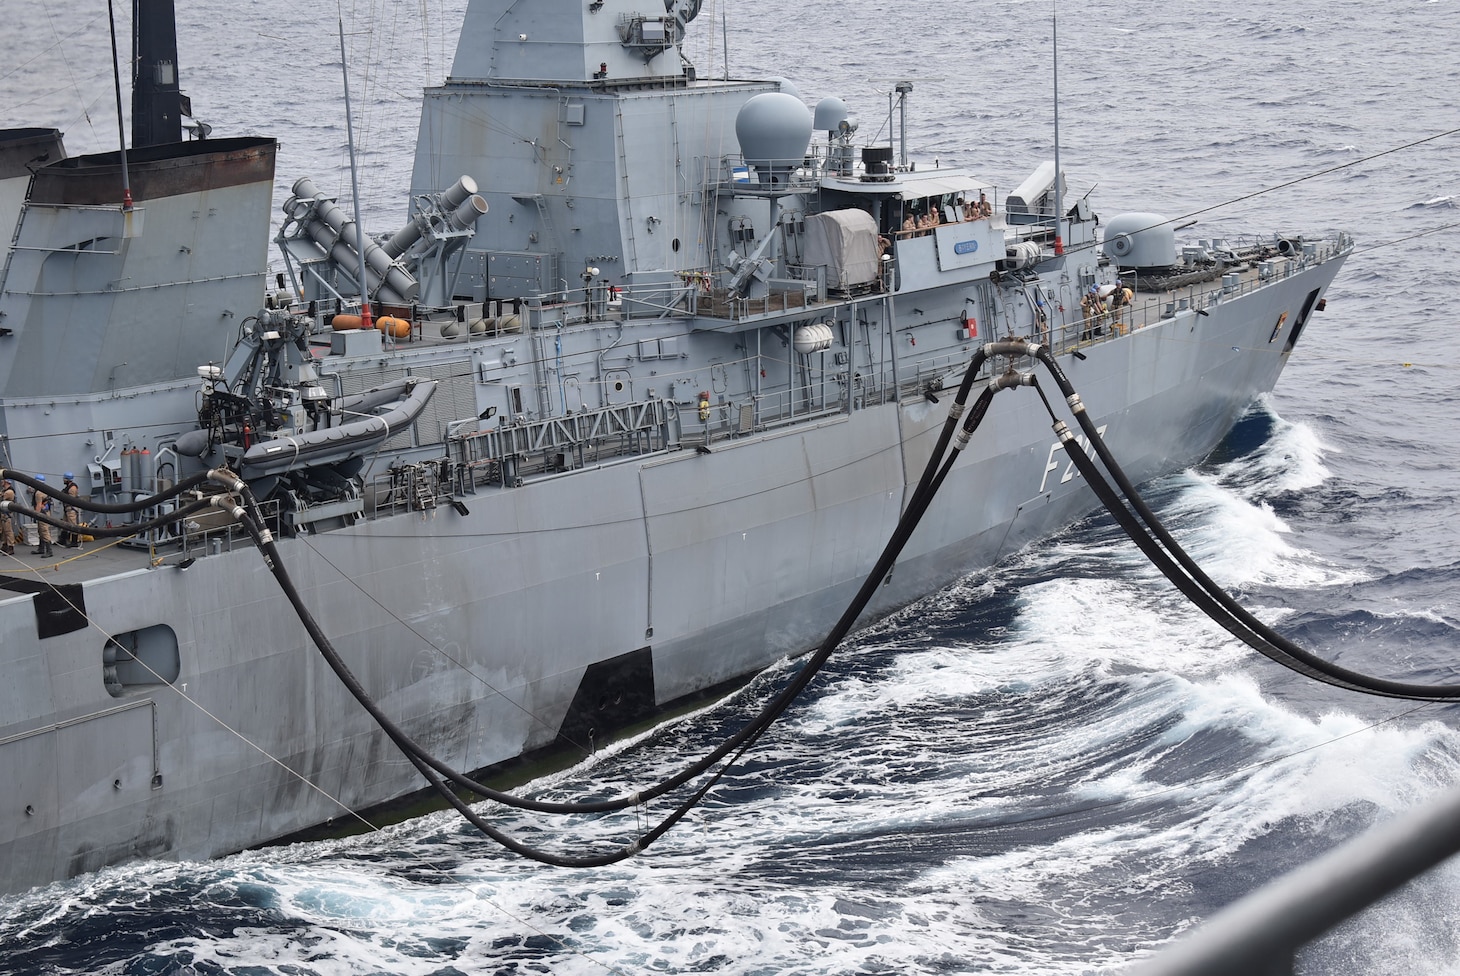 PHILIPPINE SEA (Nov. 27, 2021) -- Henry J. Kaiser-class replenishment oiler USNS Big Horn (T-AO198) conducts underway replenishments in the Philippine Sea with partners and allies, including FGS Bayern (F217), Germany’s Brandenburg-class frigate, as part of Annual Exercise, Nov. 21-30.  Naval forces from Australia, Canada, Germany, Japan and the United States took part in the multilateral, multinational exercise, led by the Japan Maritime Self-Defense Force.  The exercise helps strengthen enduring relationships while sharpening naval proficiencies. (Photo by Juahn Gaskins)